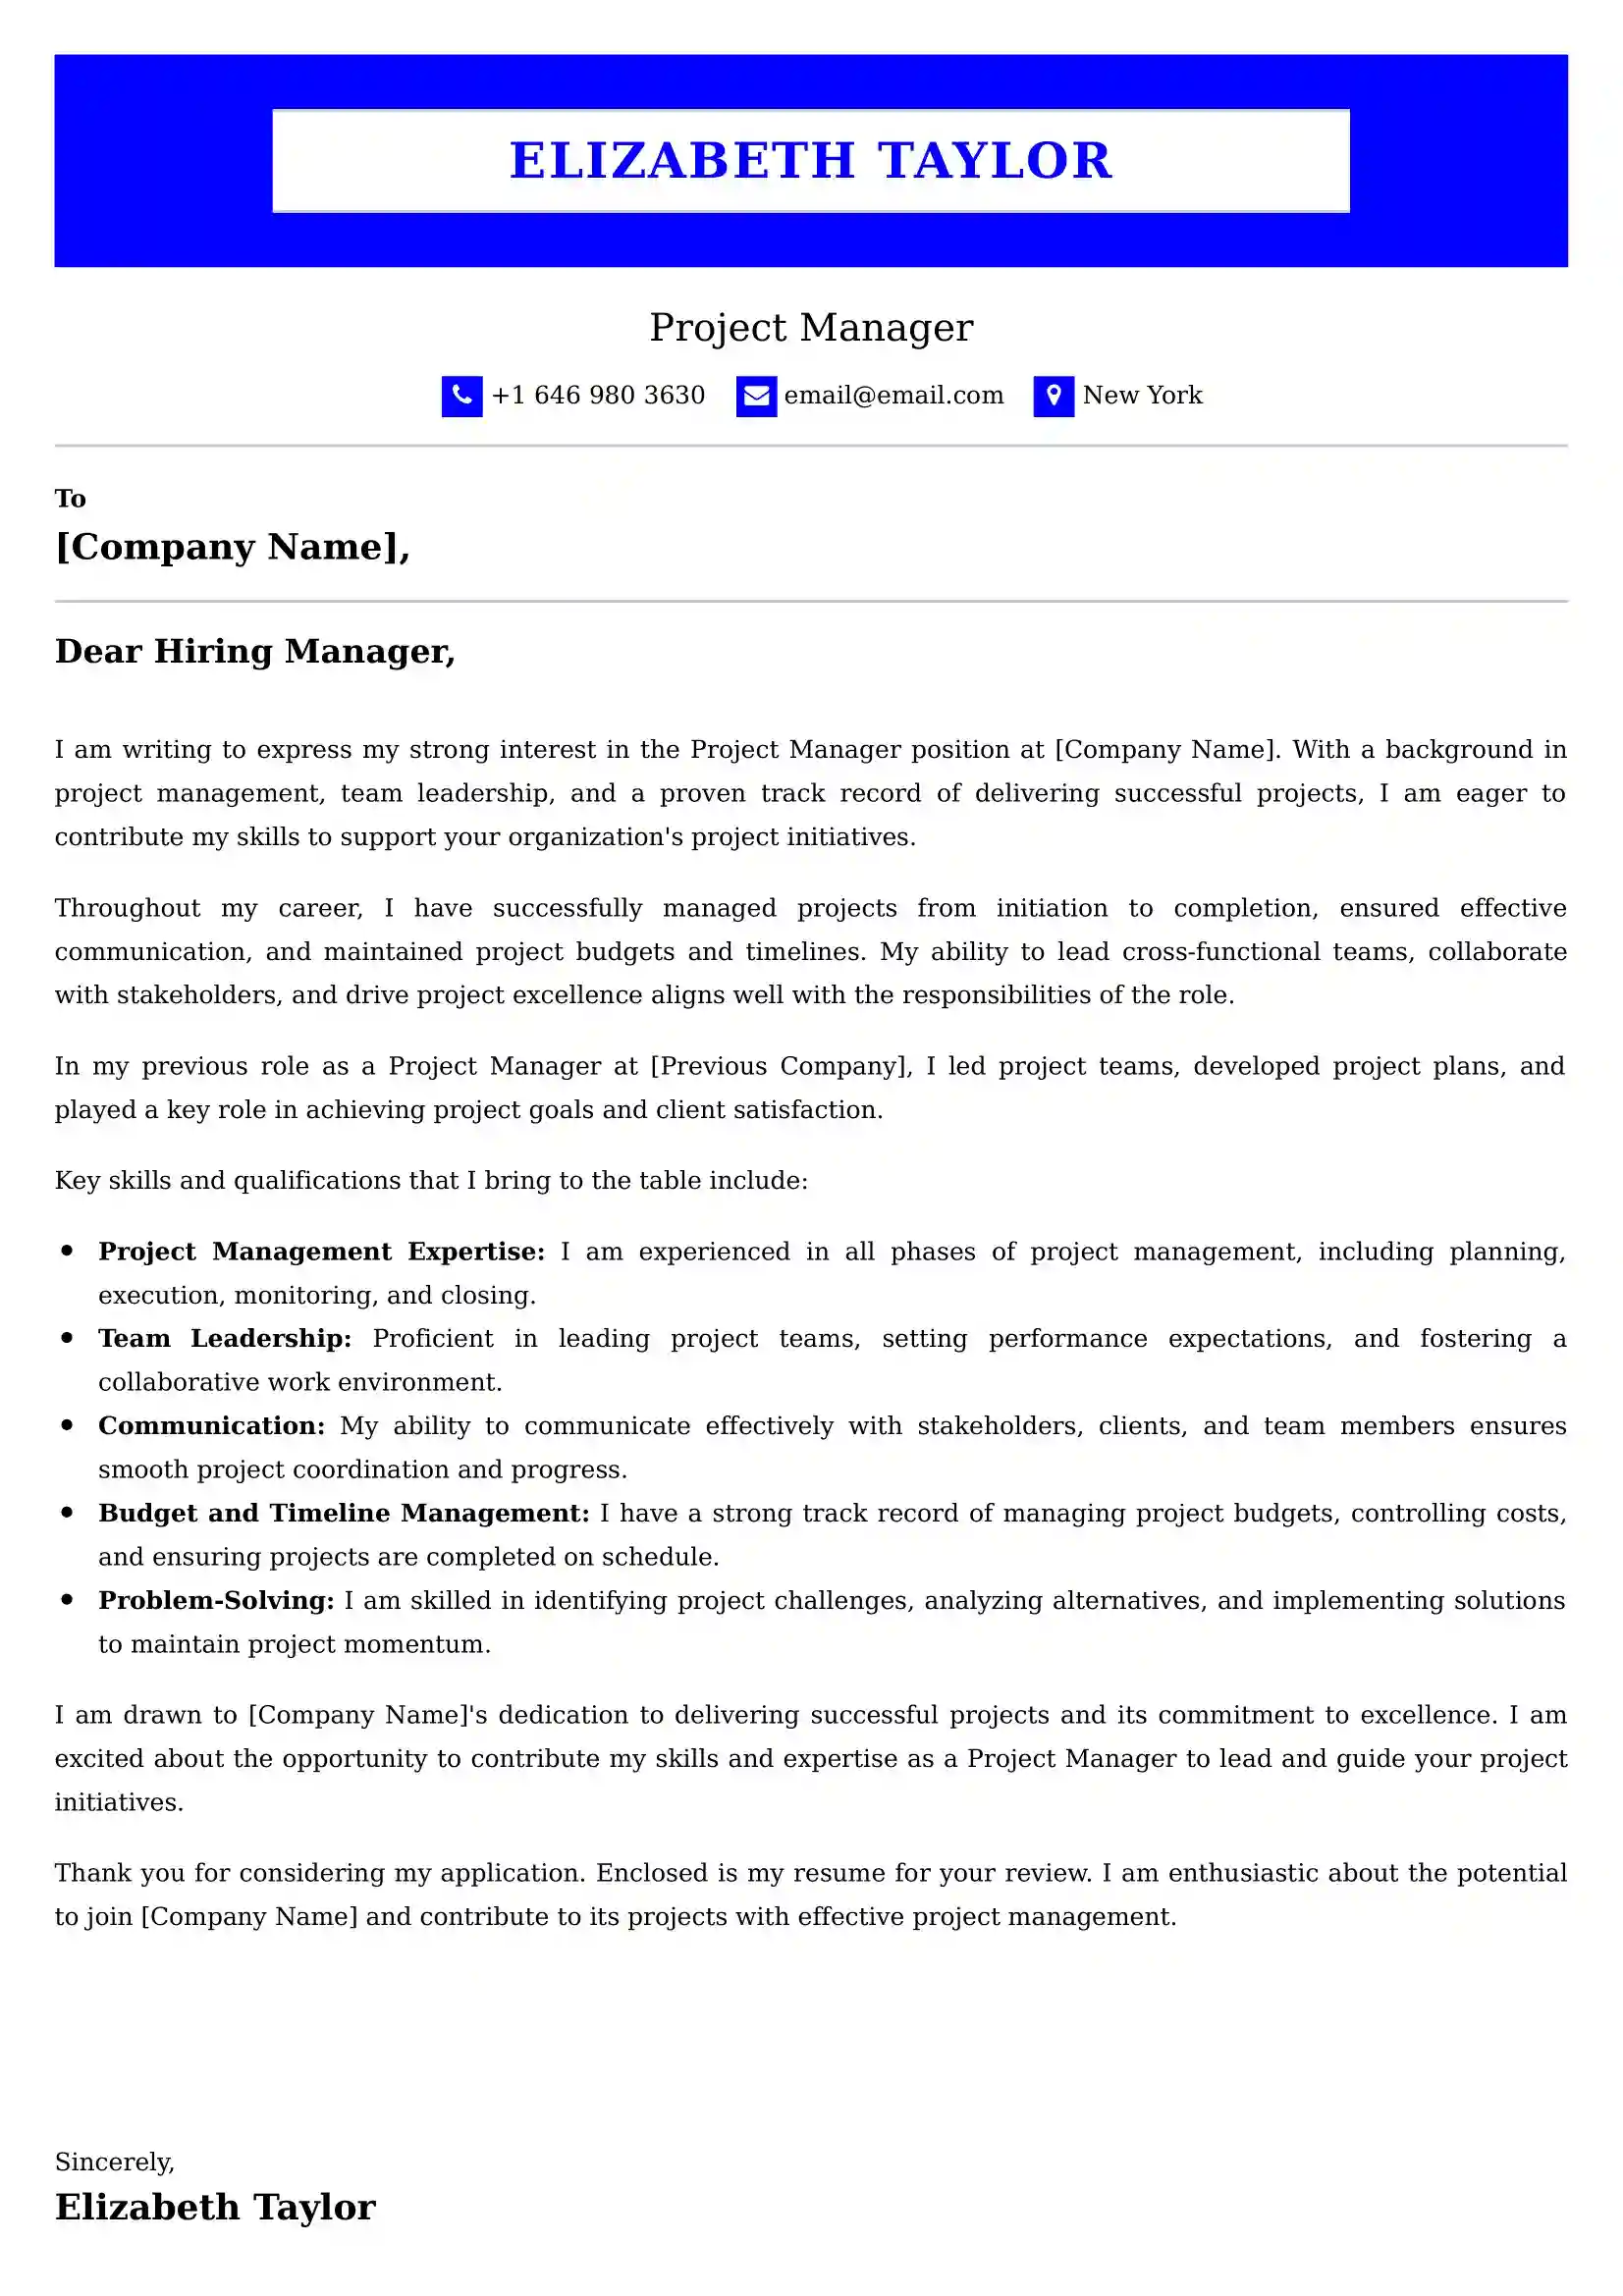 Project Manager Cover Letter Examples for UAE 